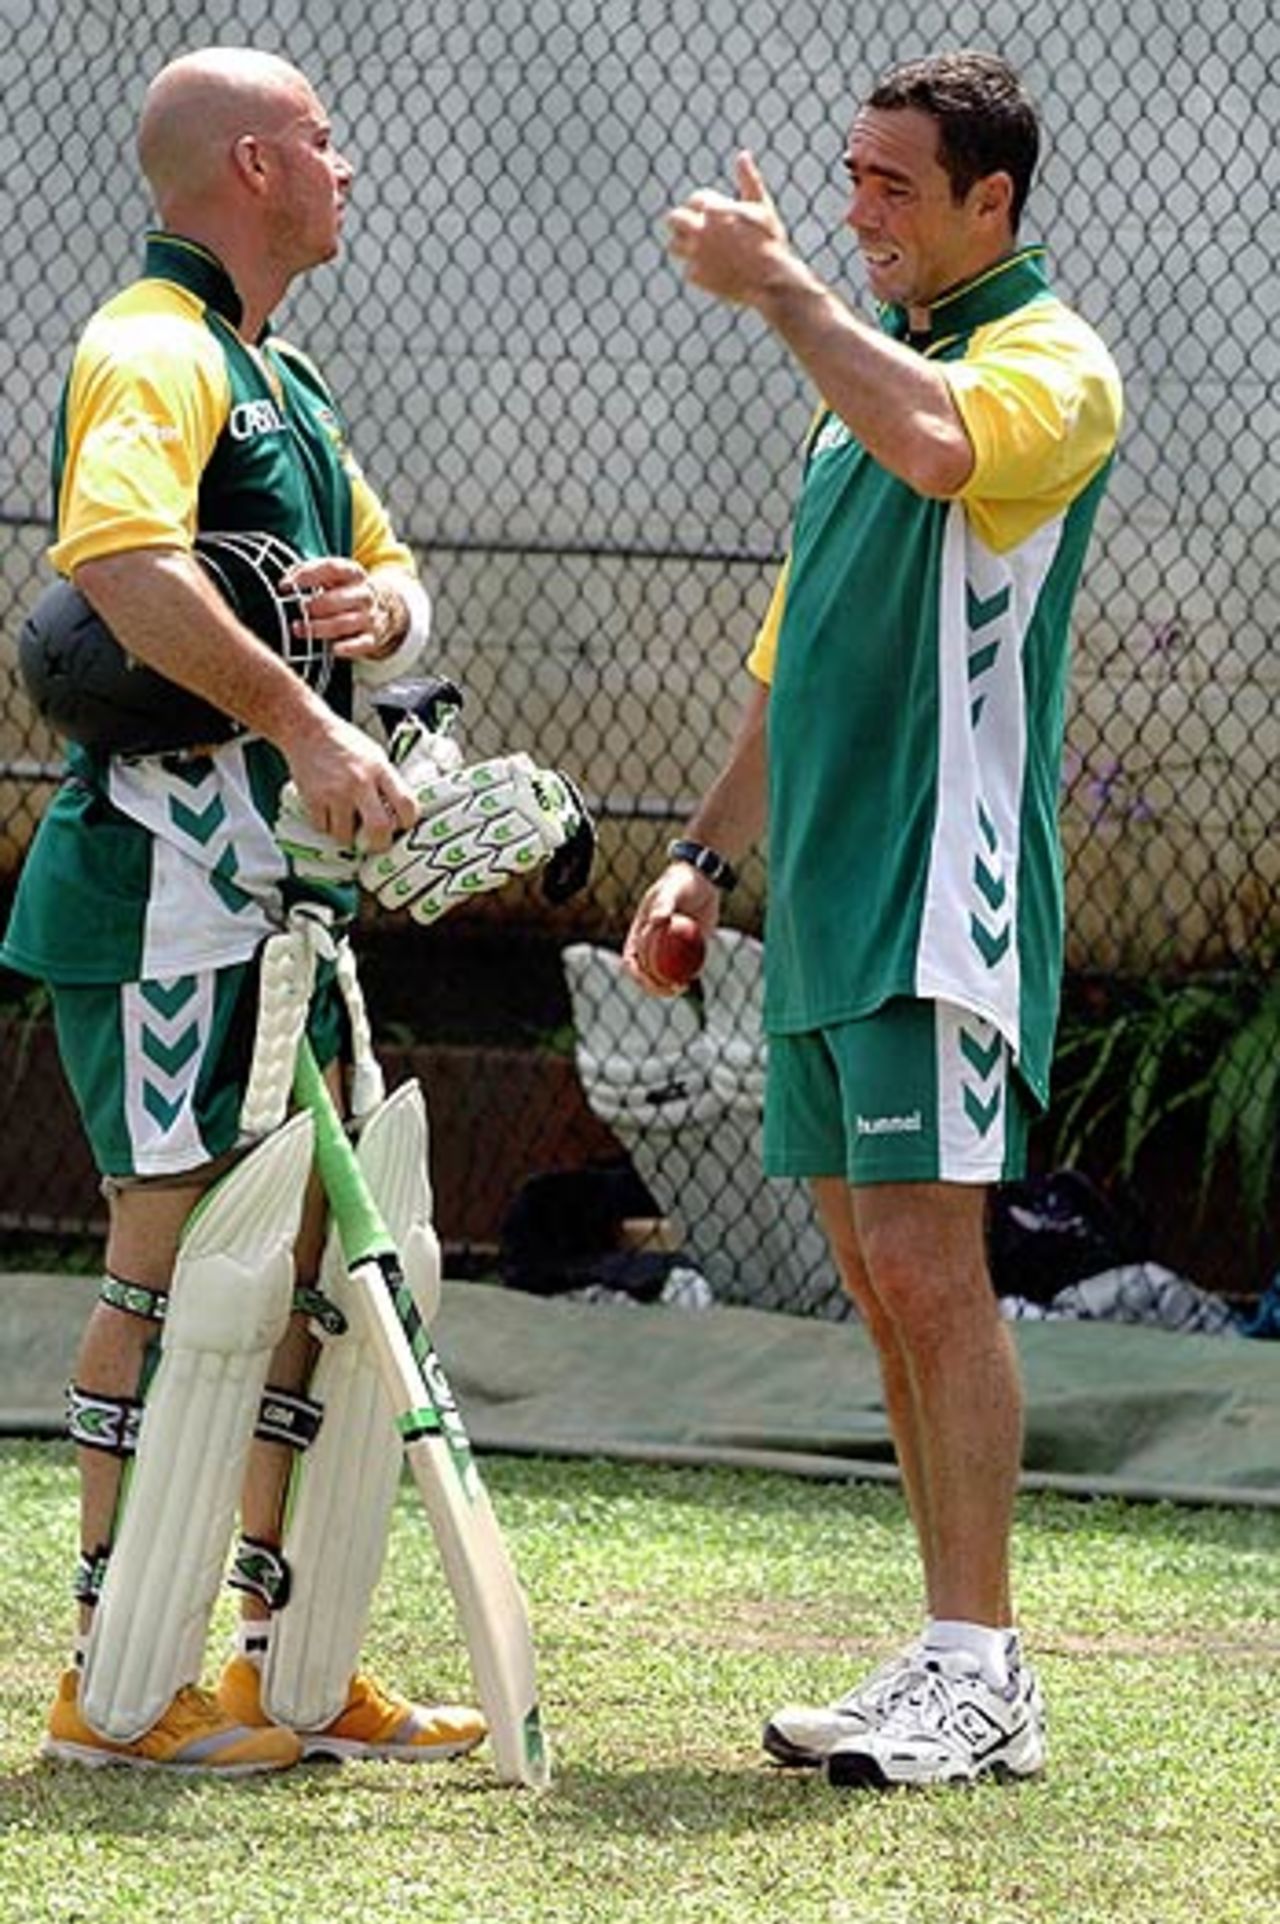 Nicky Boje gives Herschelle Gibbs a few tips on playing spin, Sinhalese Sports Club, Colombo, July 20, 2006